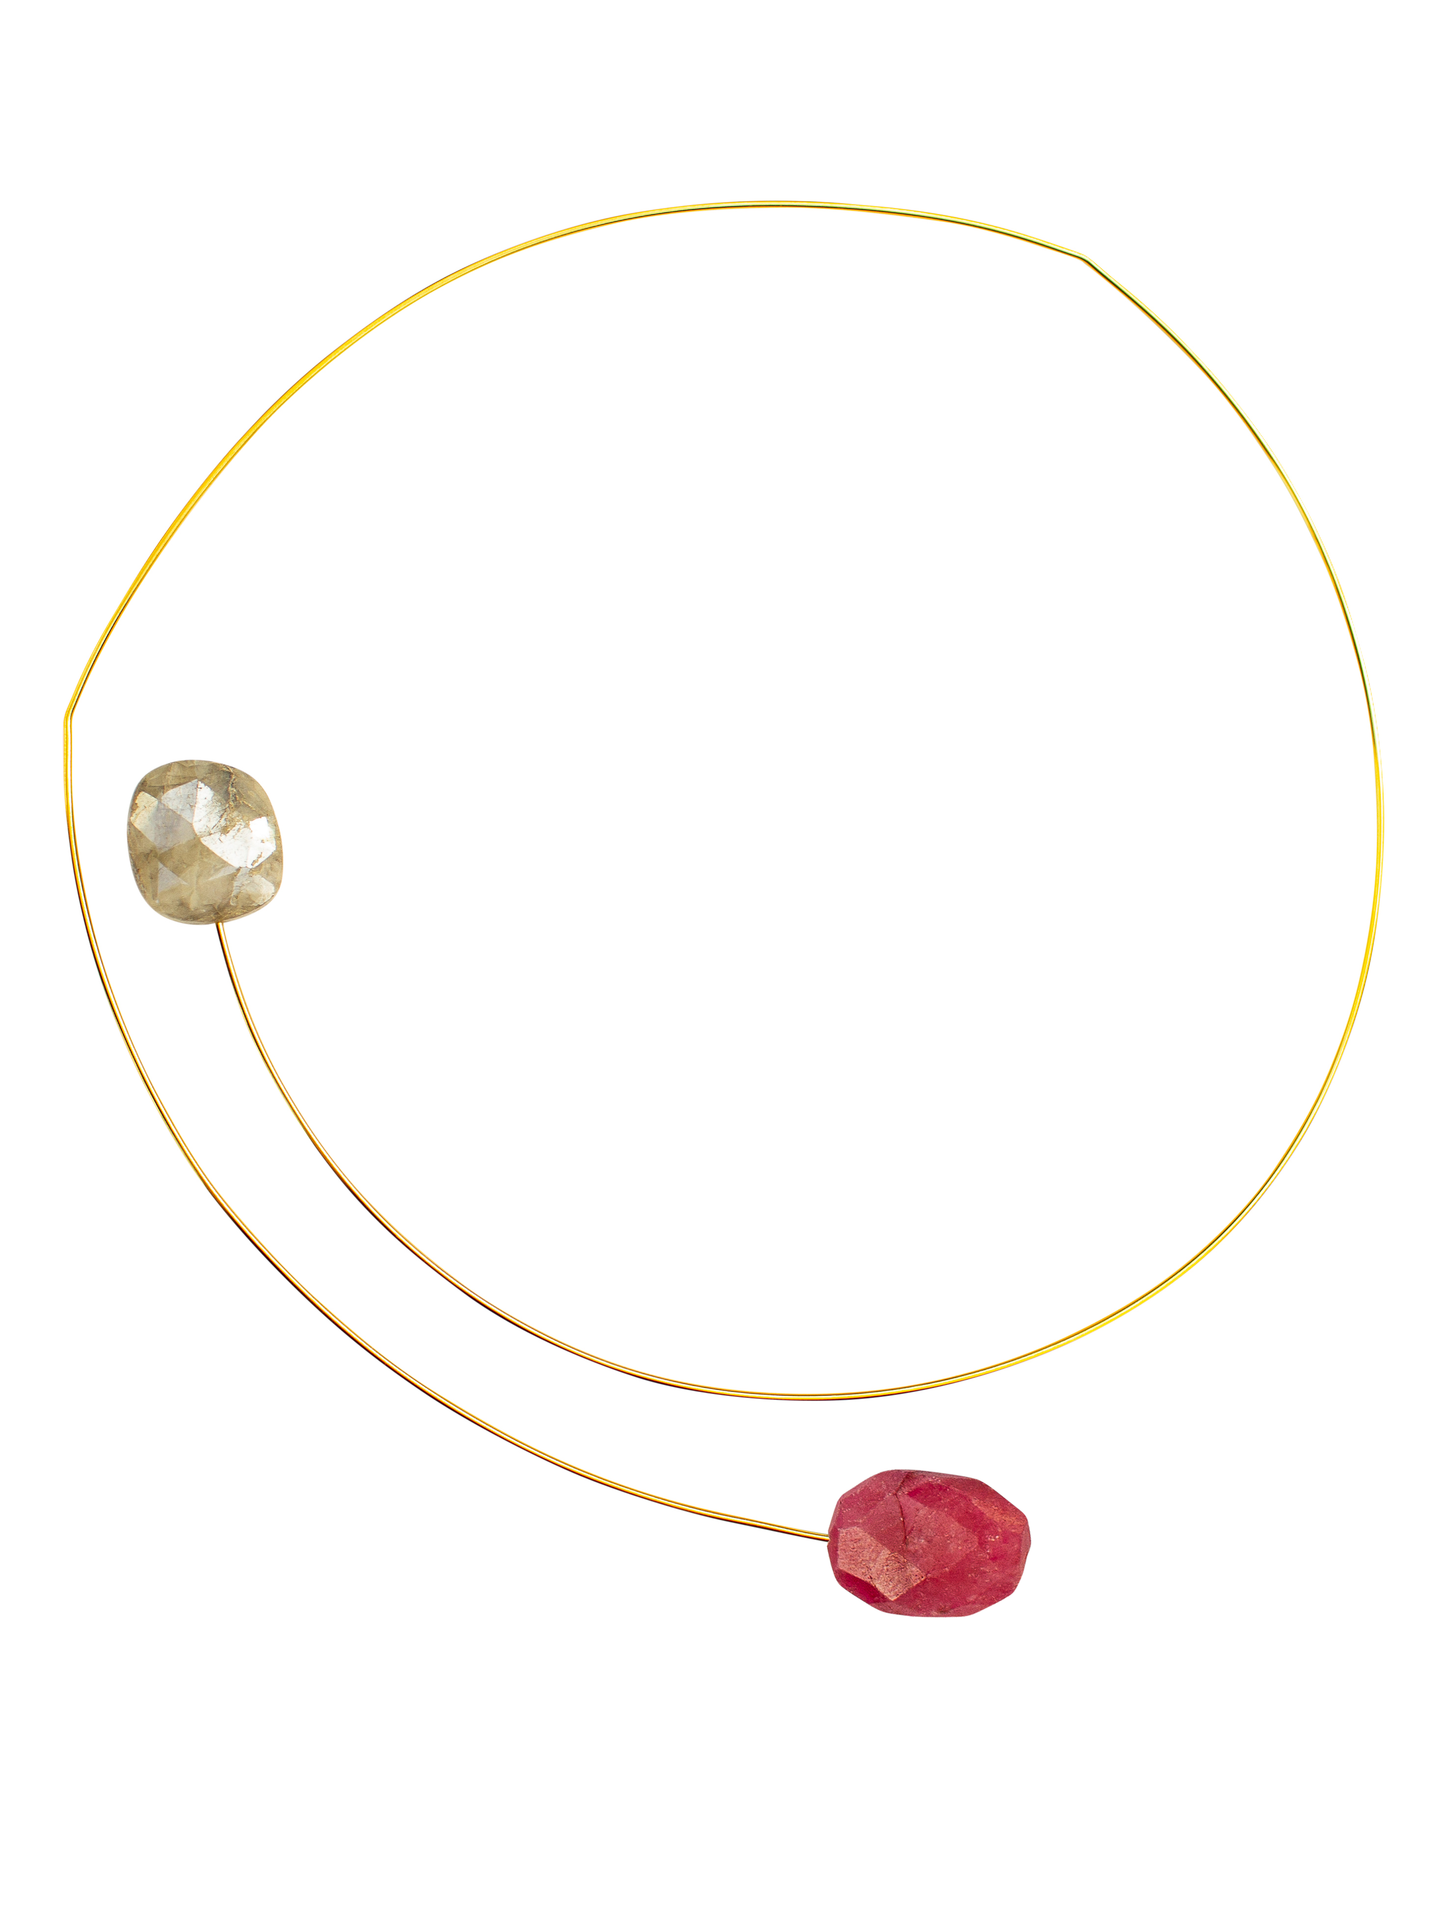 Asymmetric Neckwire with Ruby Corundum and Sapphire